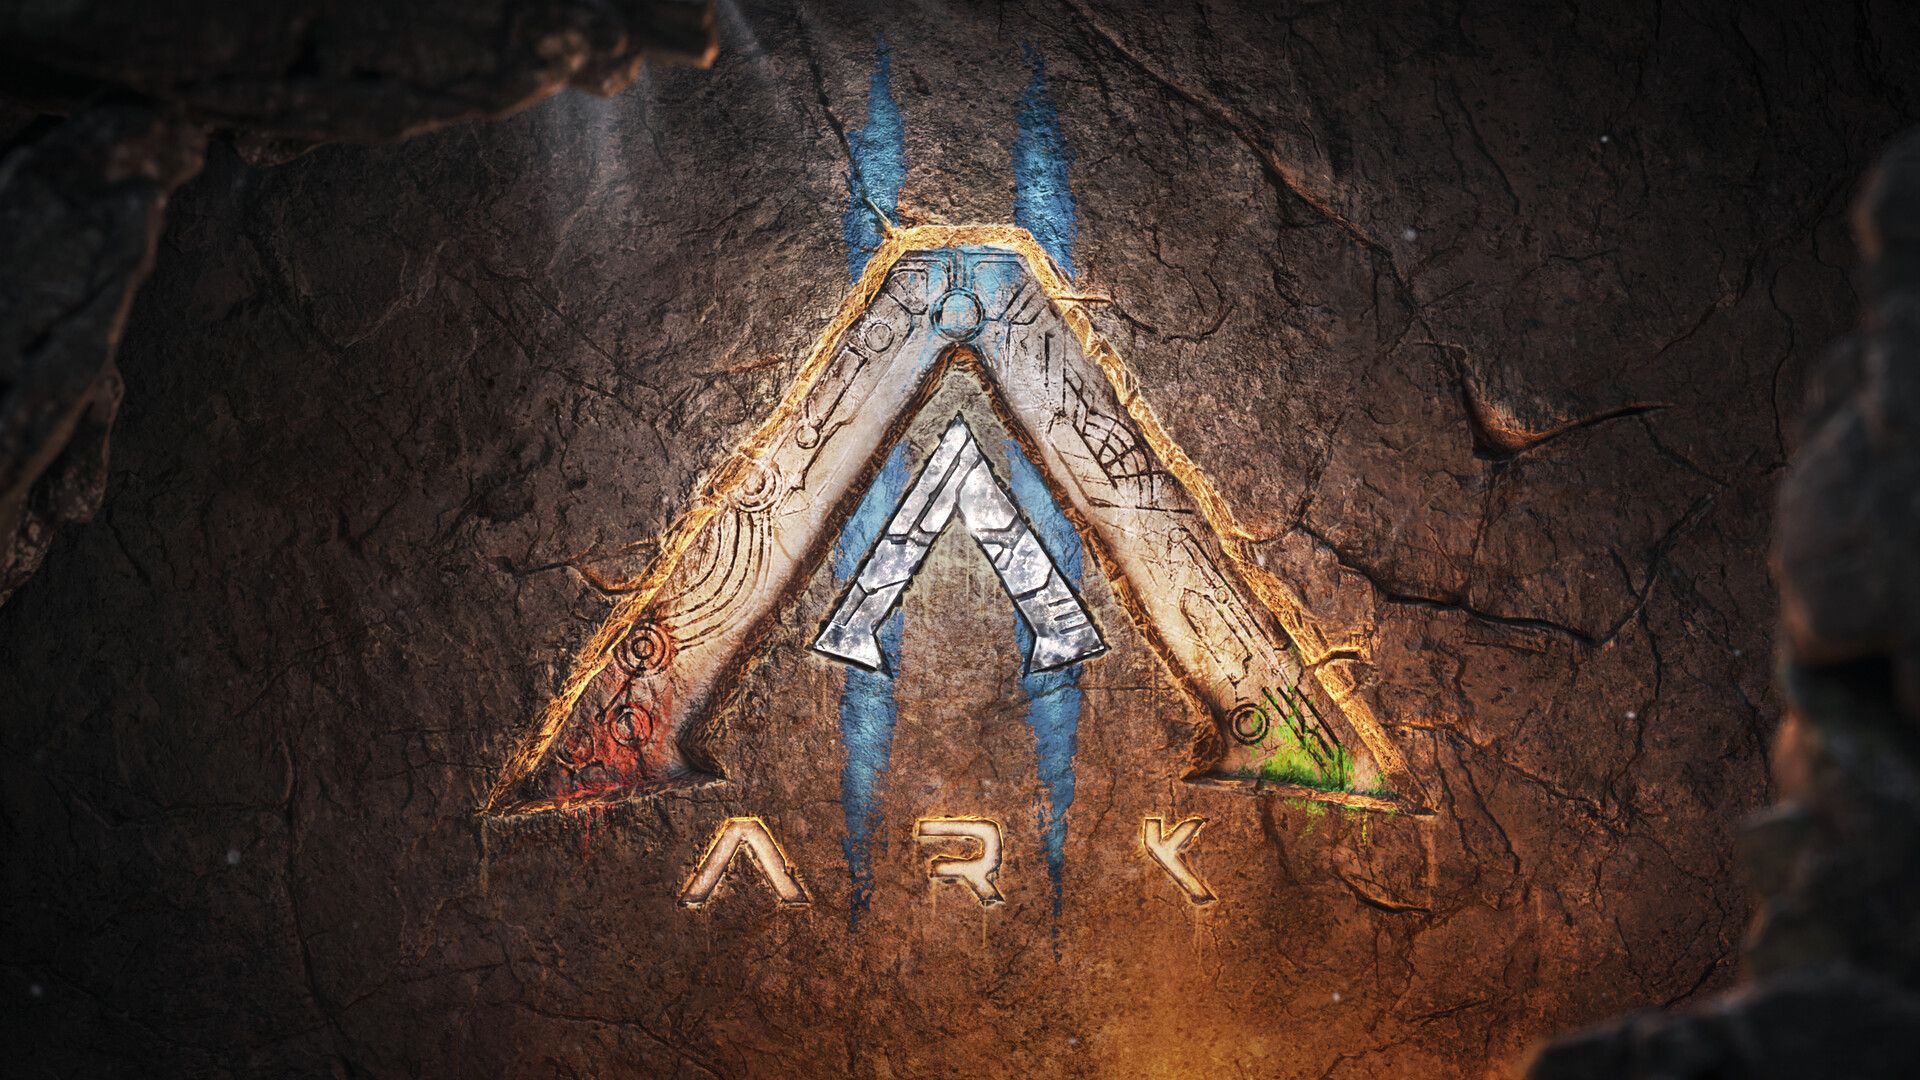 Lost Ark 2 release date speculation - News and what we want to see